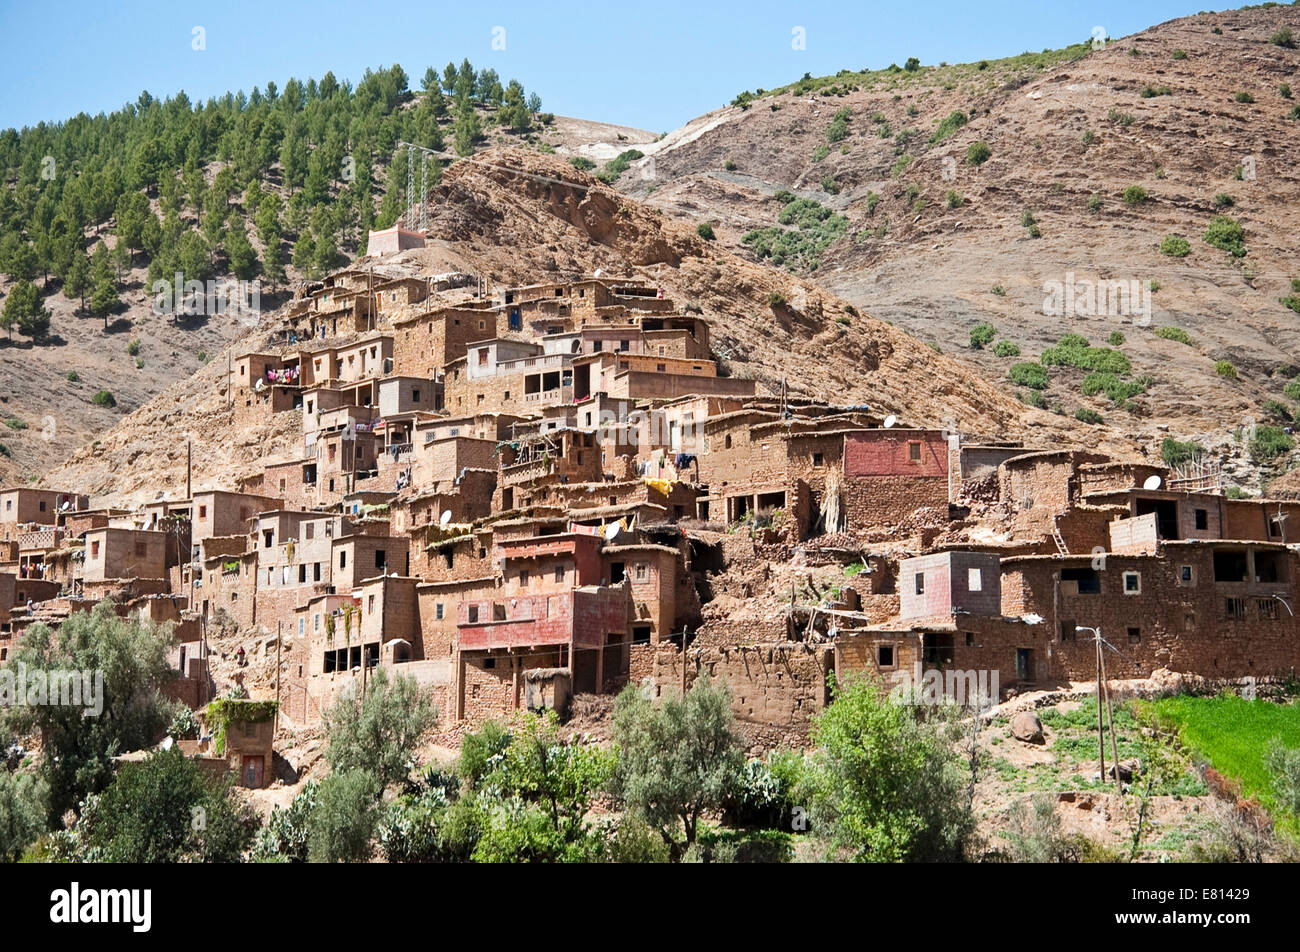 Horizontal view of a traditional mudbrick Berber village in the foothills of the High Atlas Mountain range in Morocco. Stock Photo